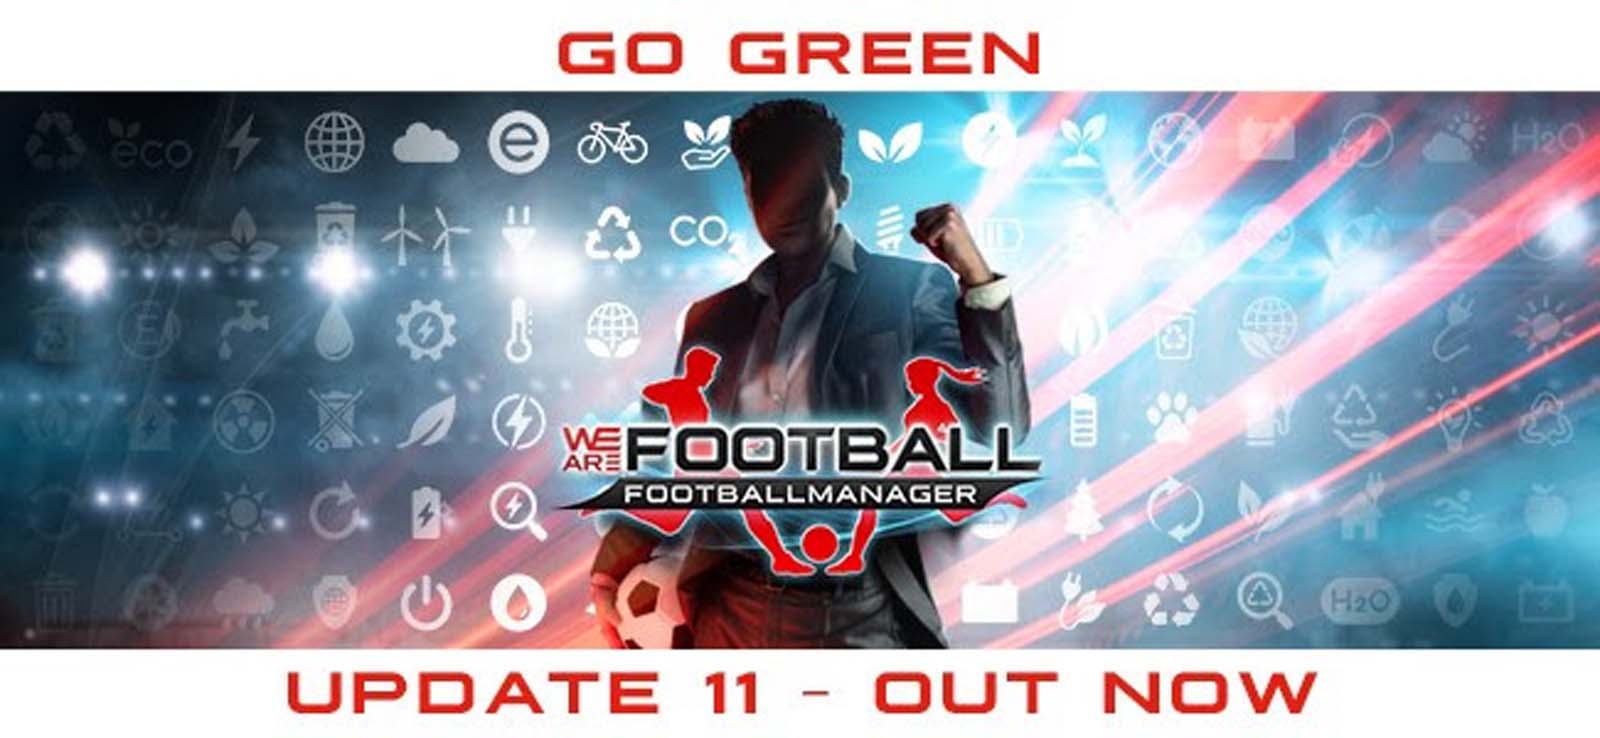 We Are Football's latest update